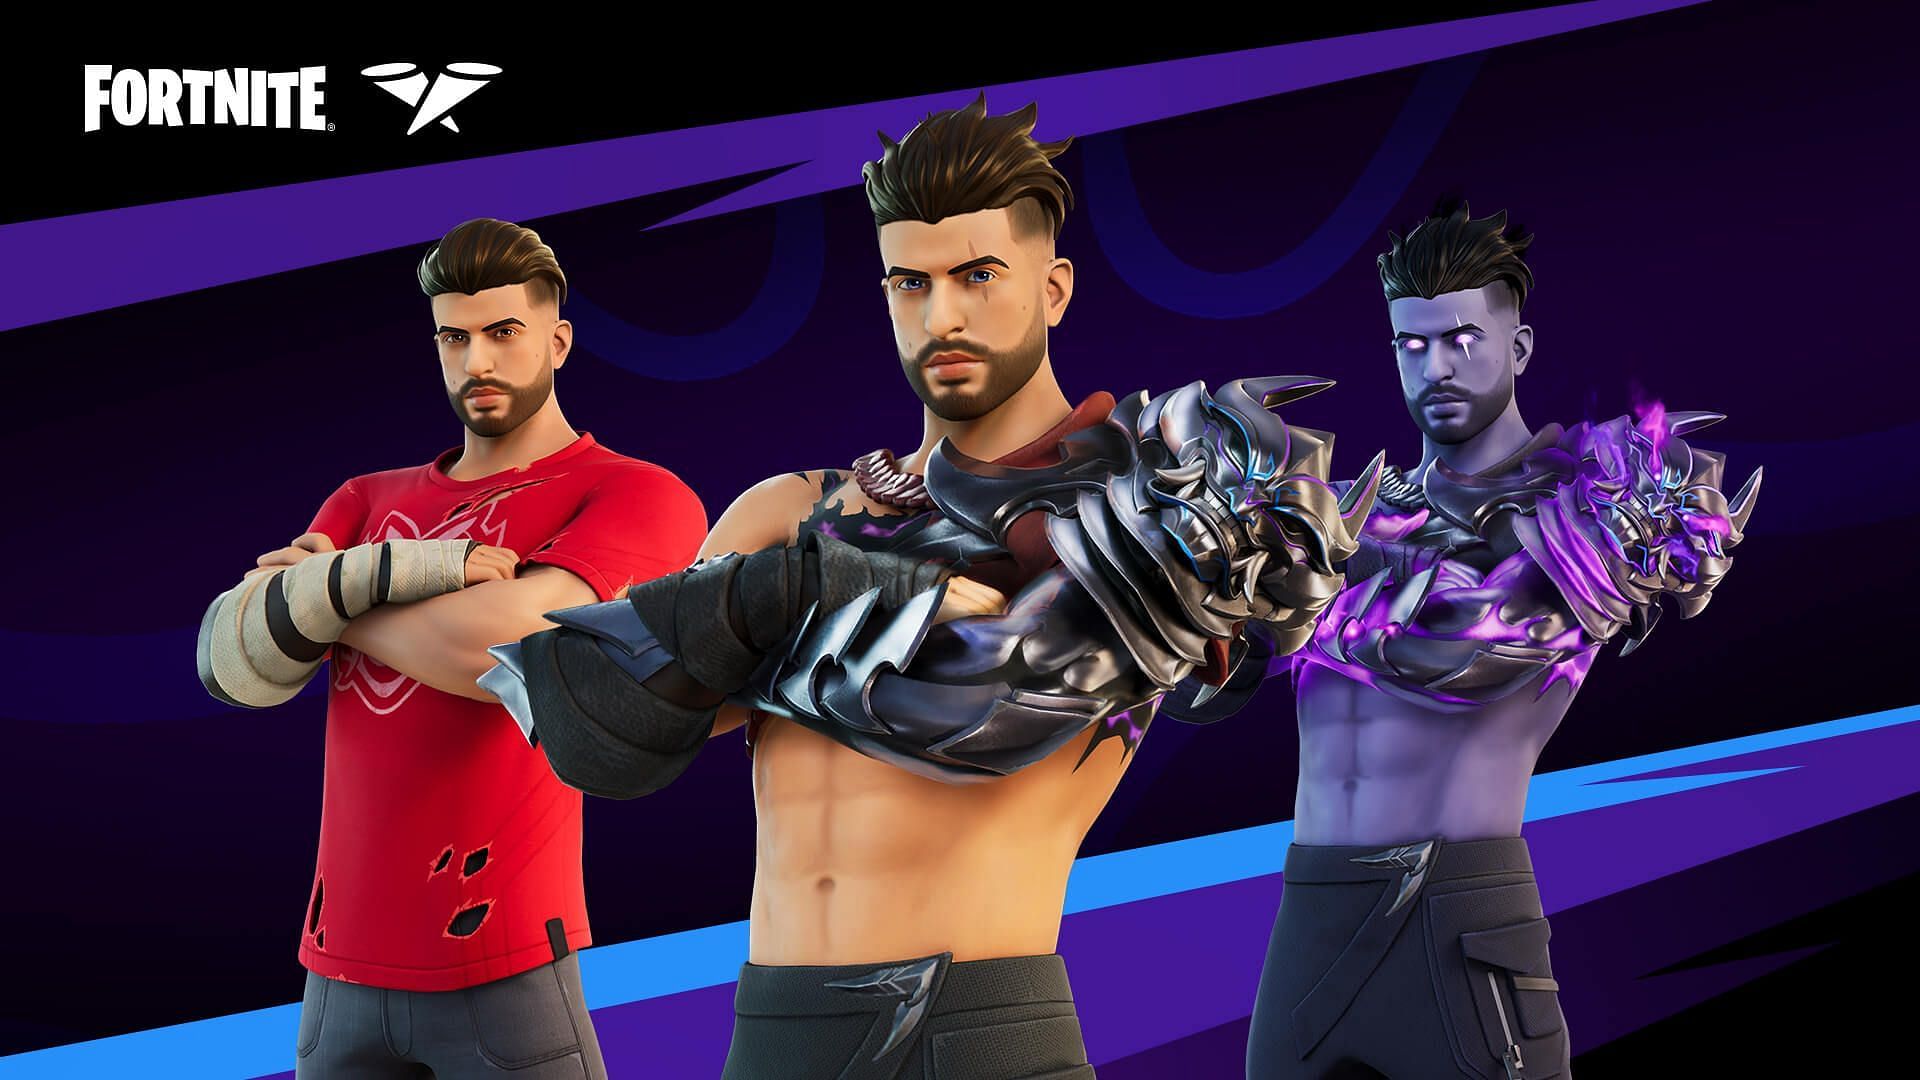 SypherPK&#039;s Fortnite skin is one of the best-looking skins in the video game (Image via Epic Games)